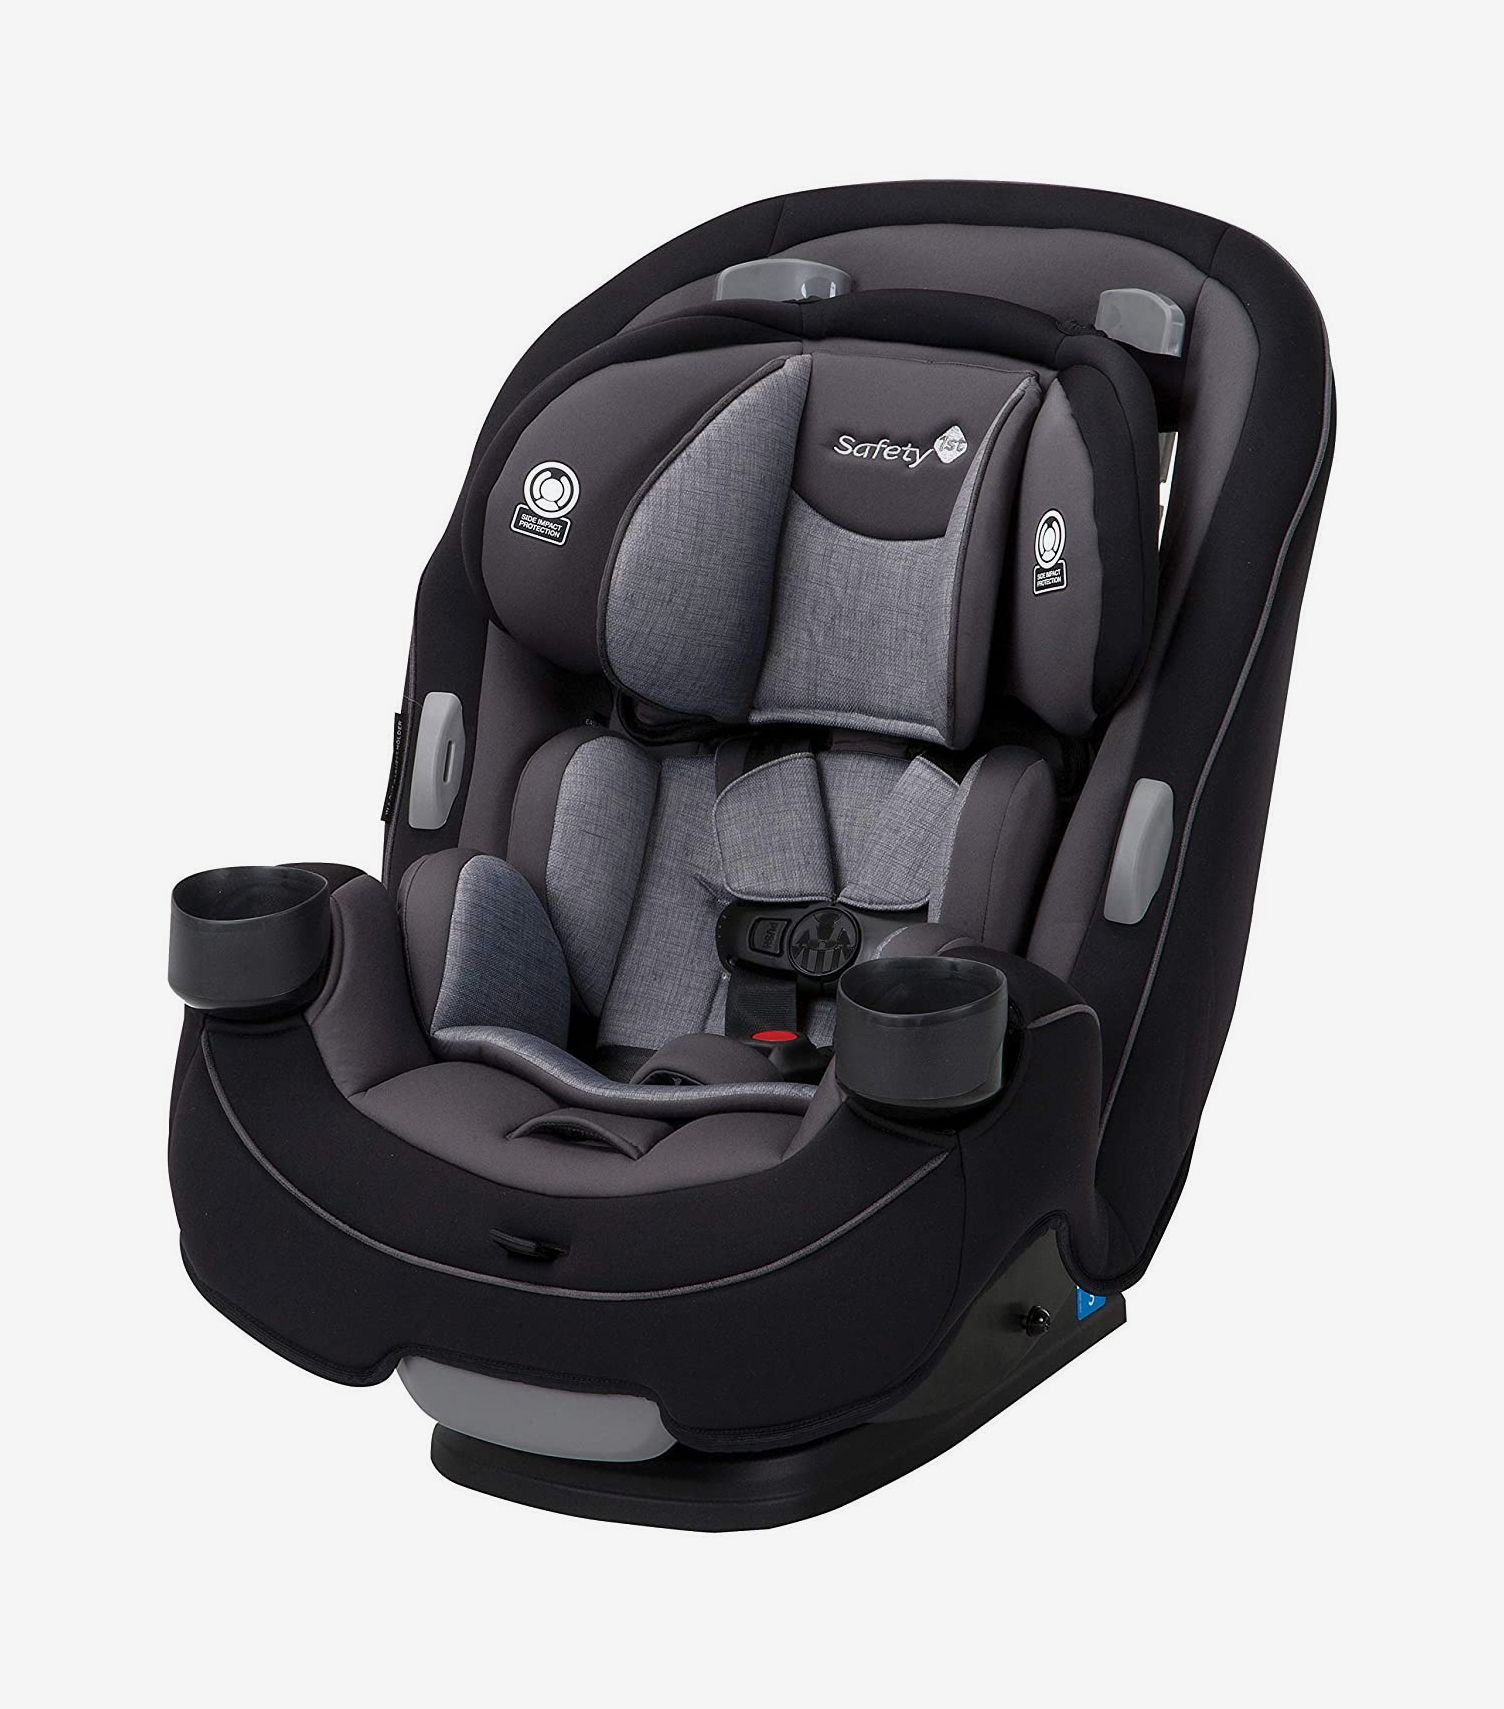 25 Best Infant Car Seats And Booster 2020 The Strategist - Top Rated Infant Car Seats 2020